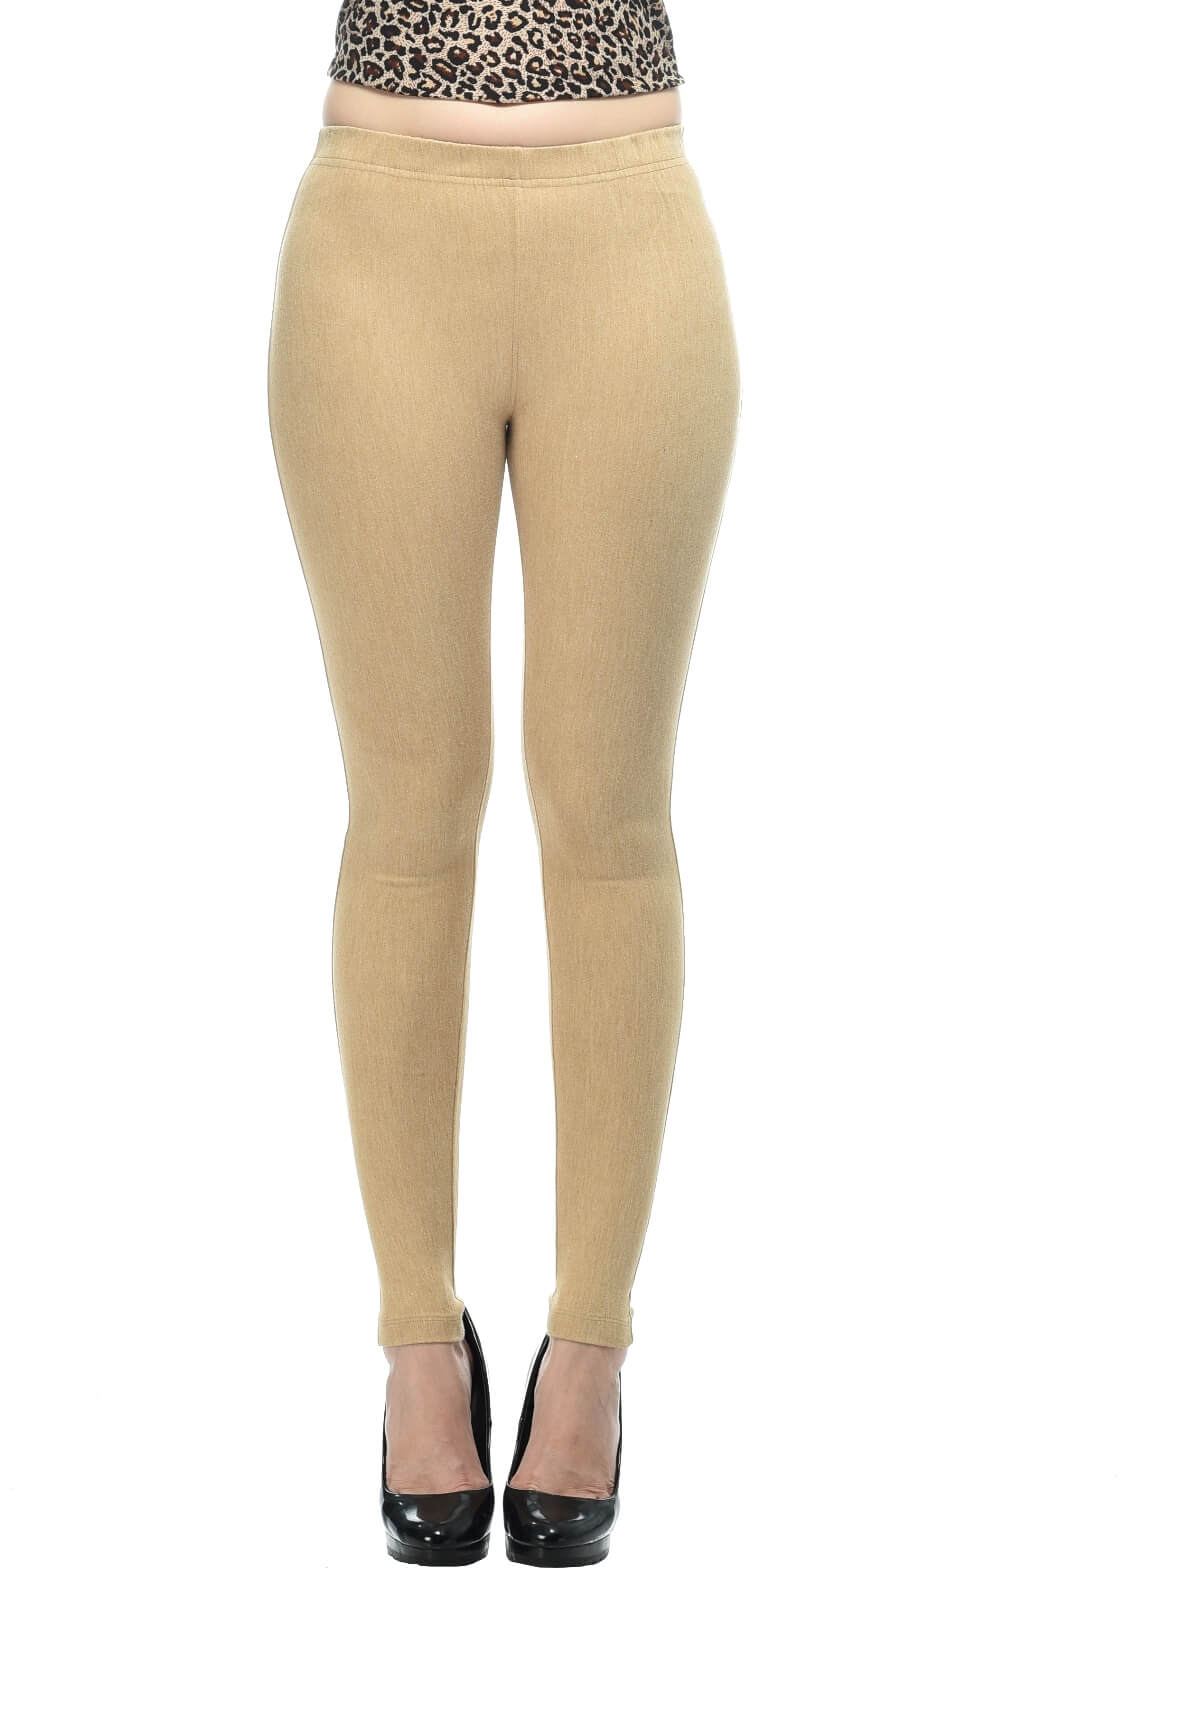 https://frenchtrendz.com/images/thumbs/0001091_frenchtrendzcotton-modal-spandex-camel-jegging.jpeg